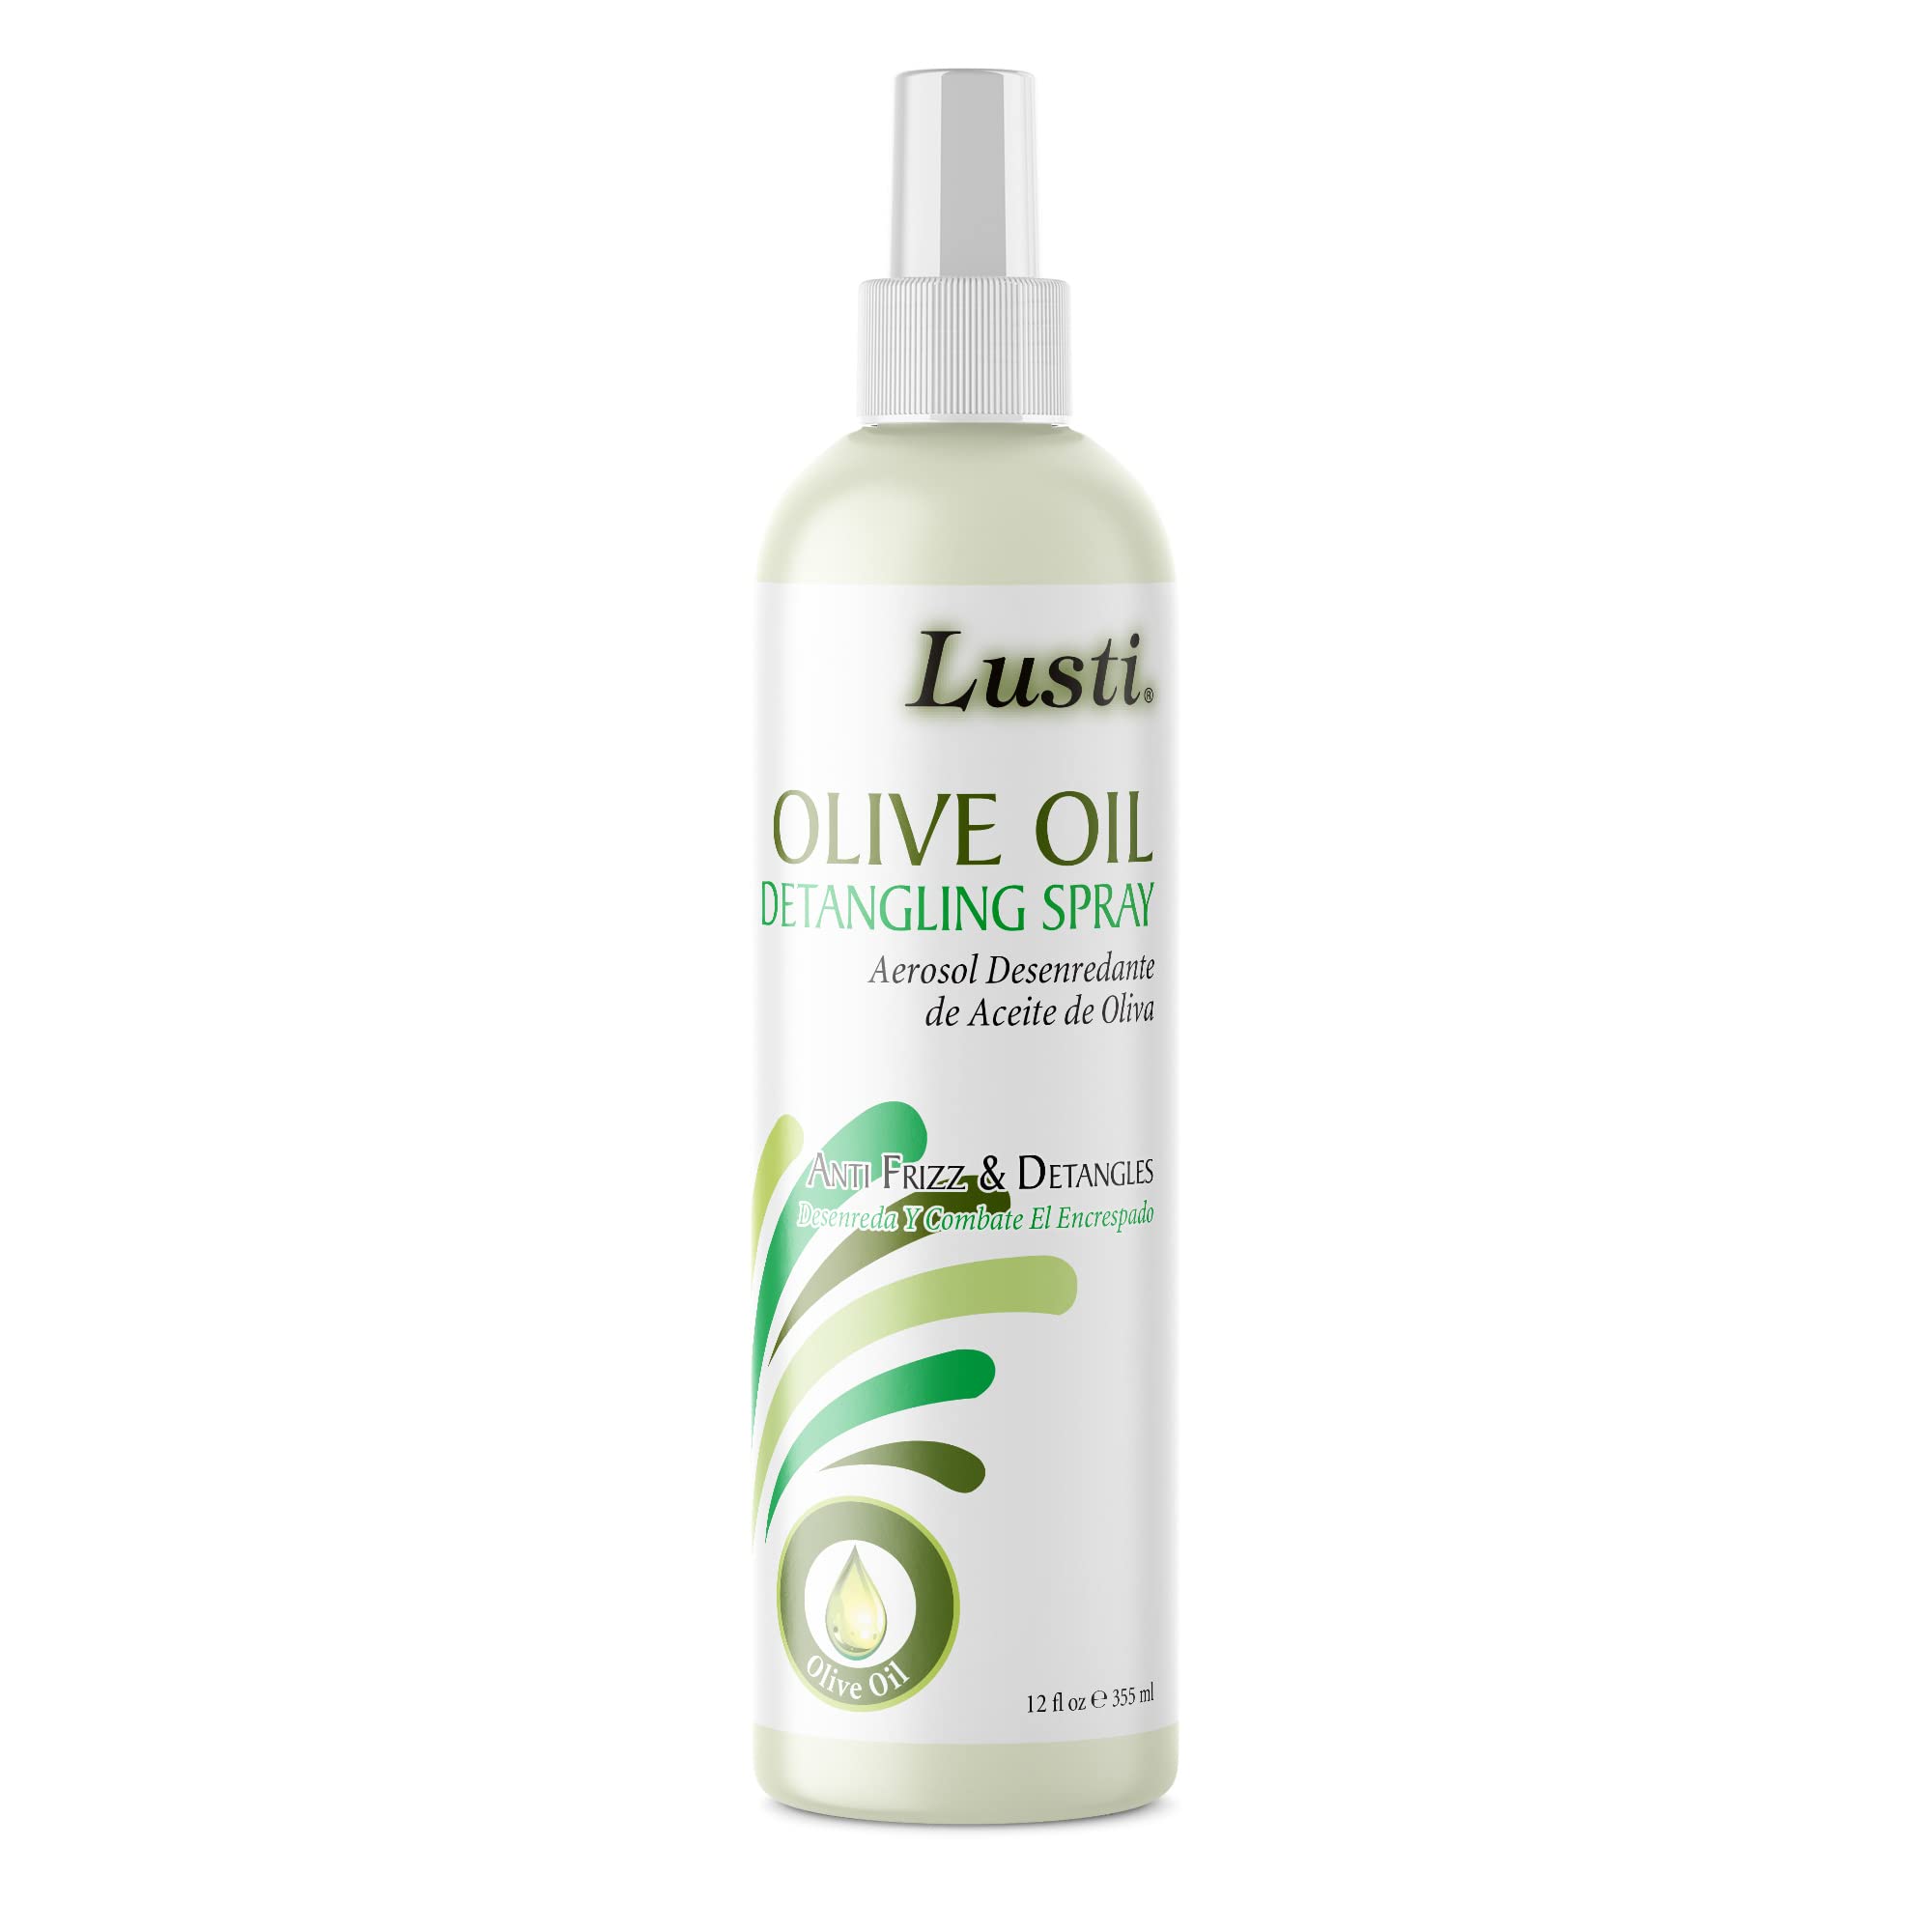 Lusti Olive Oil Detangling Spray, 12 fl oz - Anti-Frizz - Strengthen Damaged Hair - Reducing Breakage - Enriched with Amino Proteins